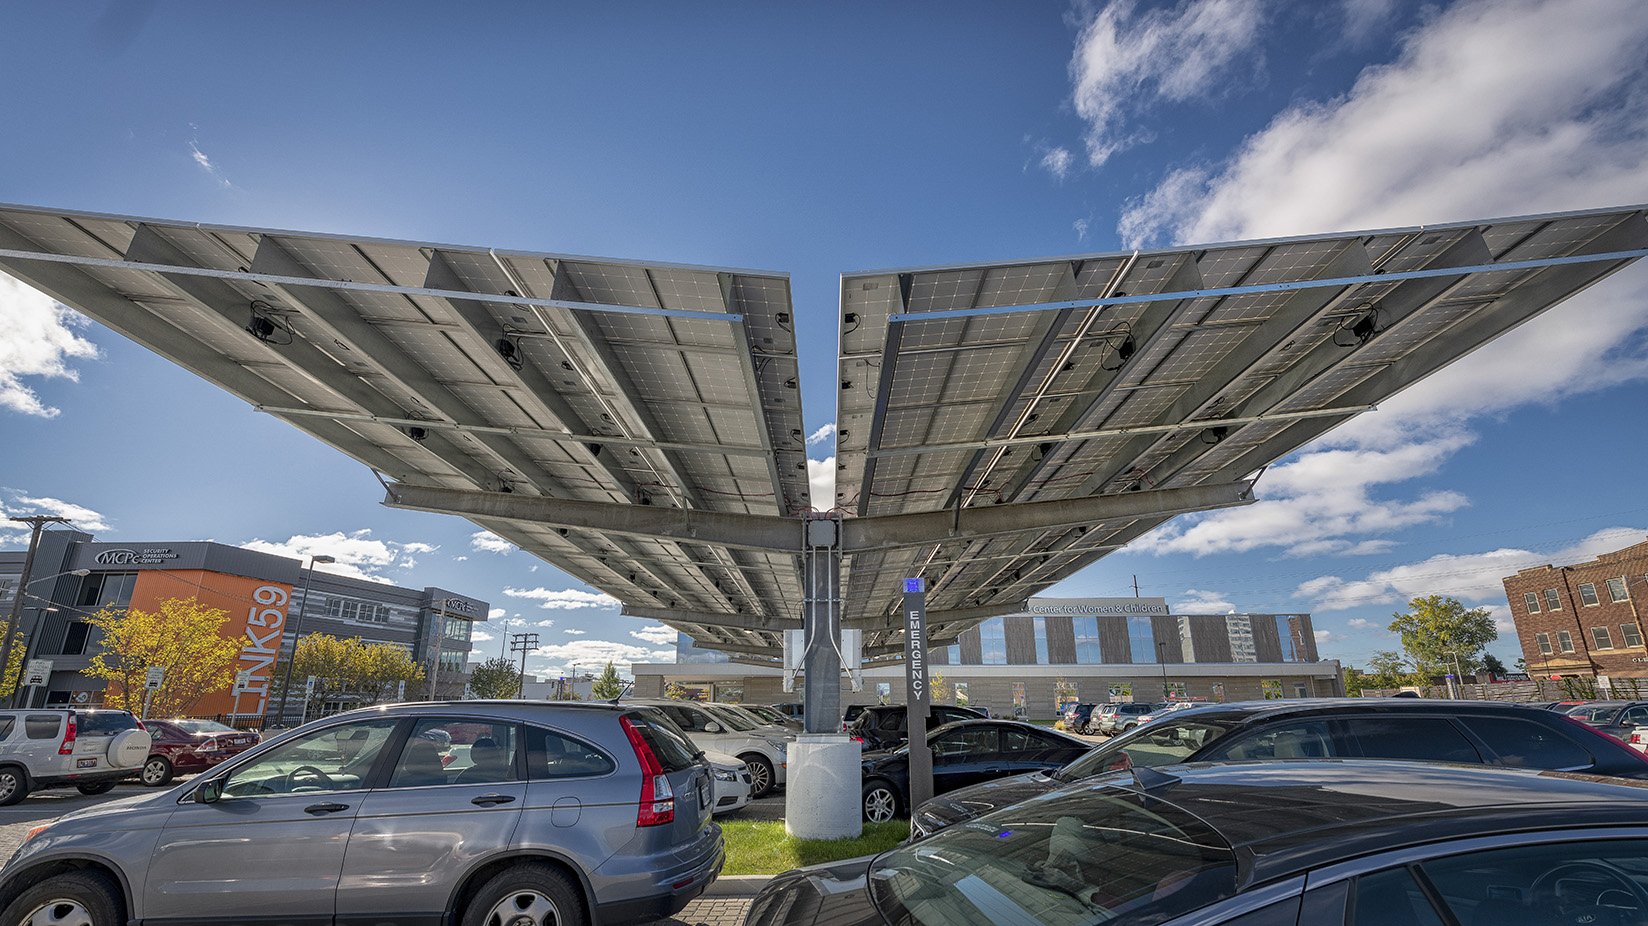  A solar canopy provides shade for cars in the parking lot and clean energy for the building 